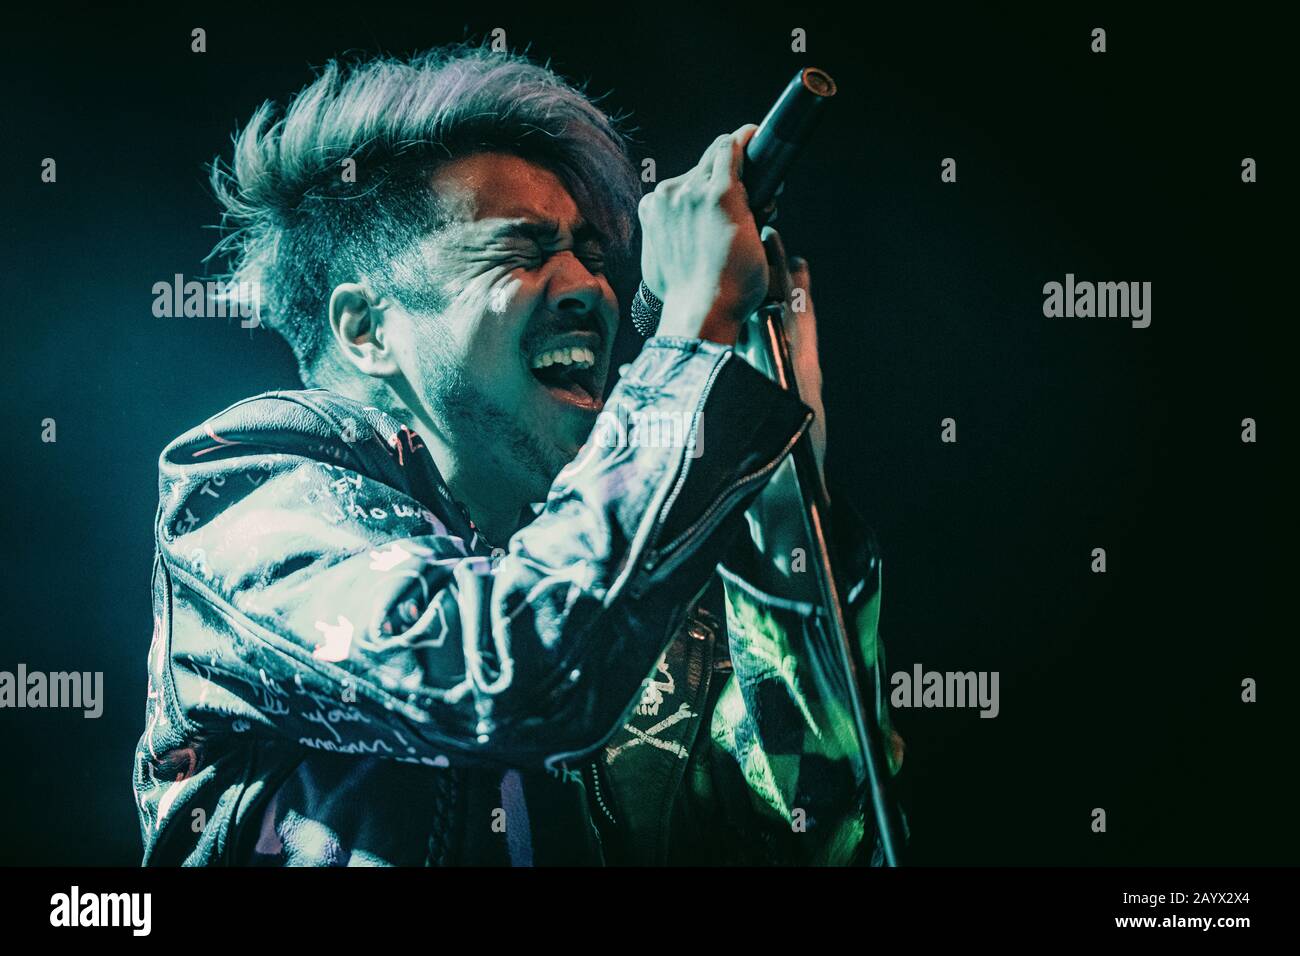 Copenhagen, Denmark. 15th, February 2020. The Japanese metal band Crossfaith performs a live concert at Amager Bio in Copenhagen. Here vocalist Kenta Koie is seen live on stage. (Photo credit: Gonzales Photo - Nikolaj Bransholm). Stock Photo